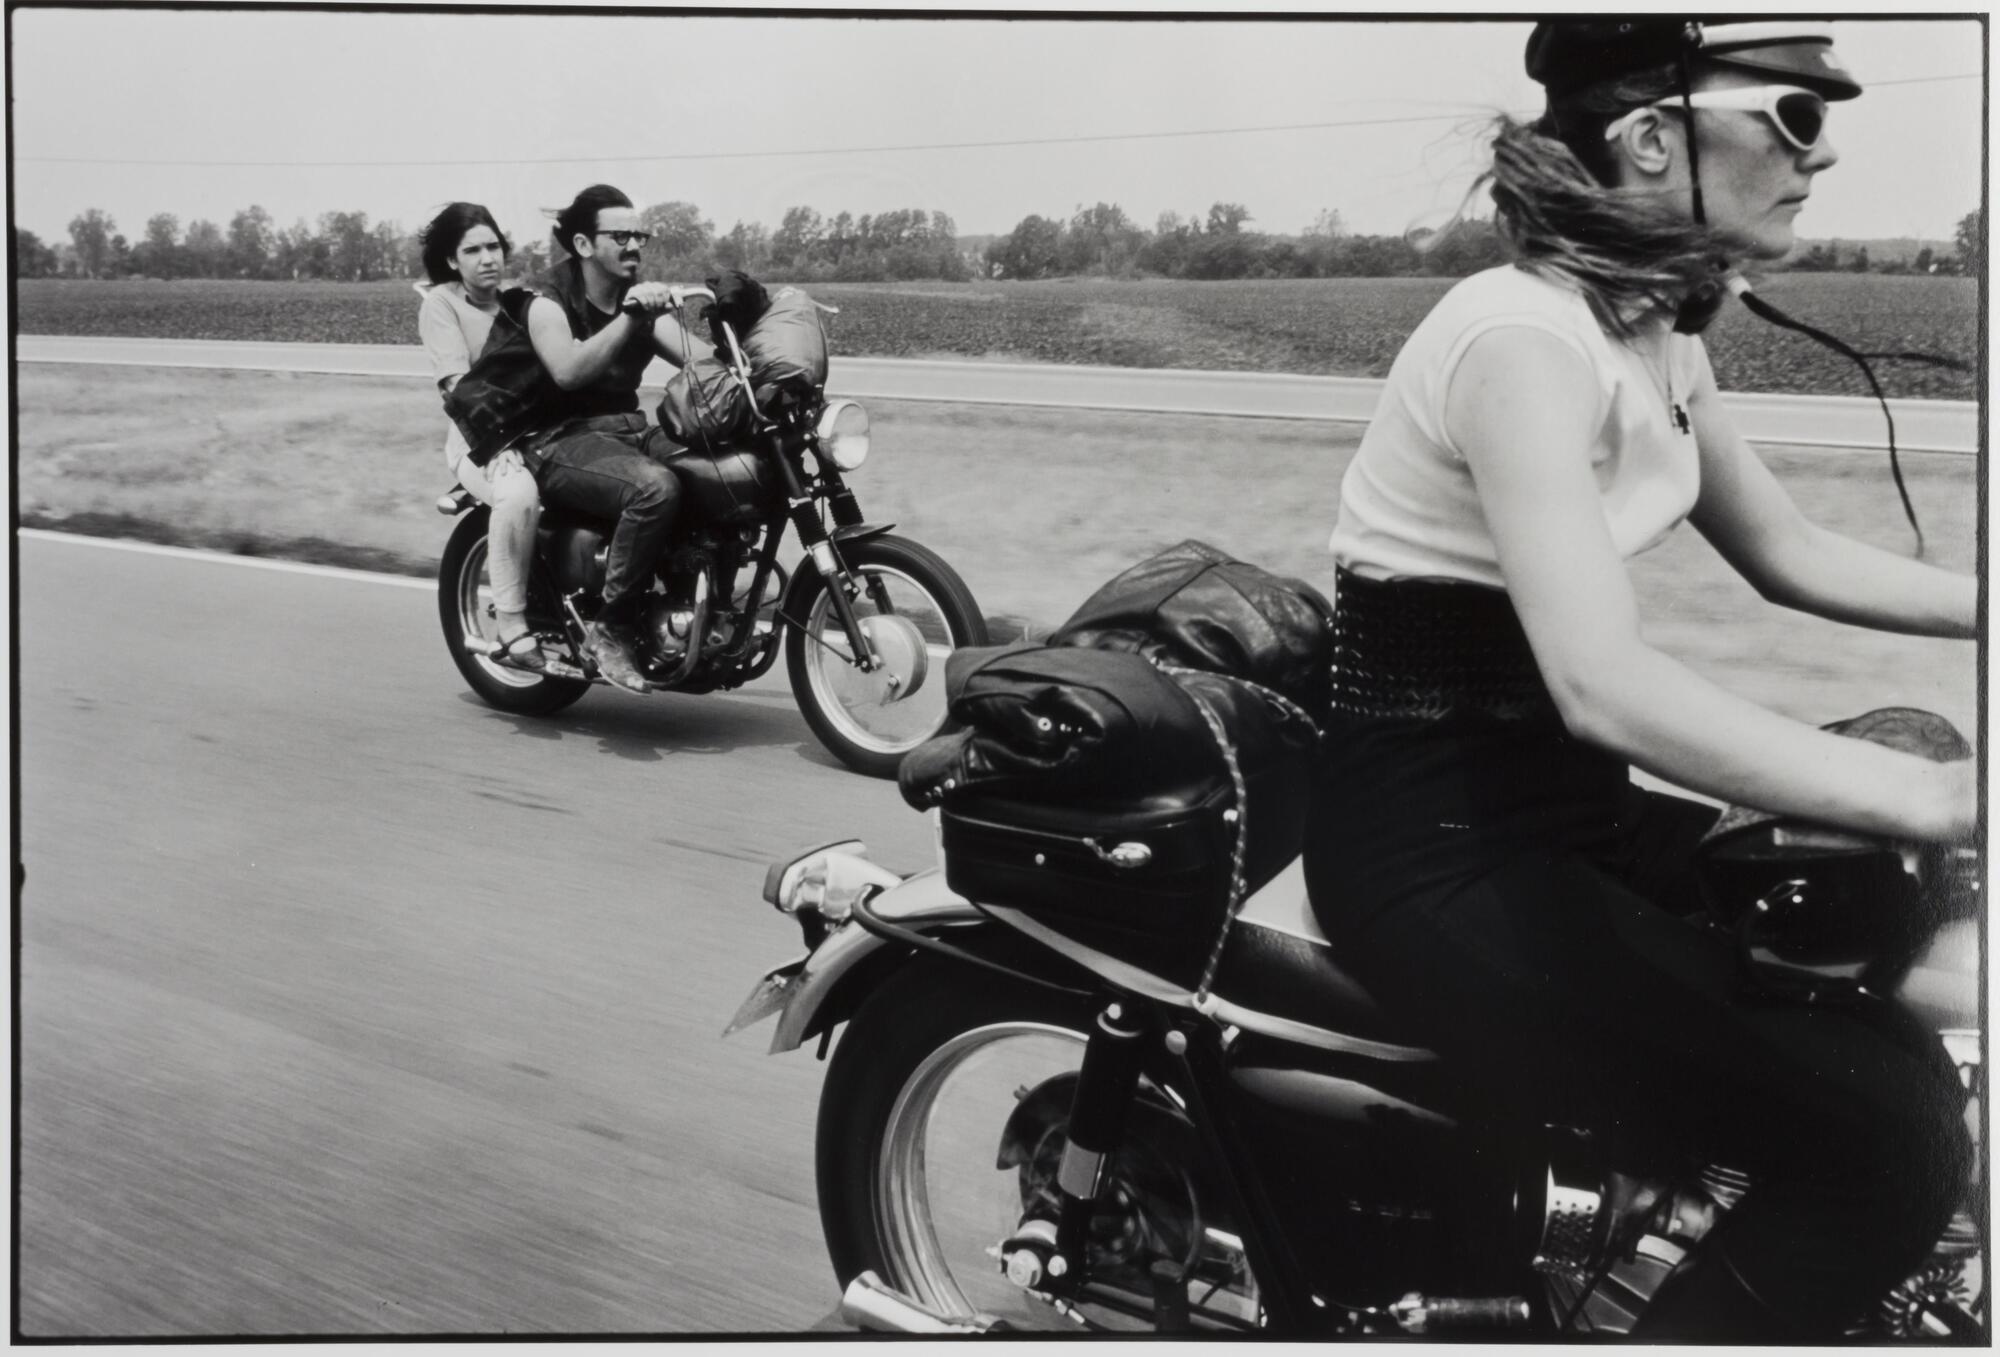 A photograph of two motorcycles driving on a highway. A woman rides the first motorcycle, which is cropped at the right-side of the frame, while a man and woman ride behind in the mid-ground.